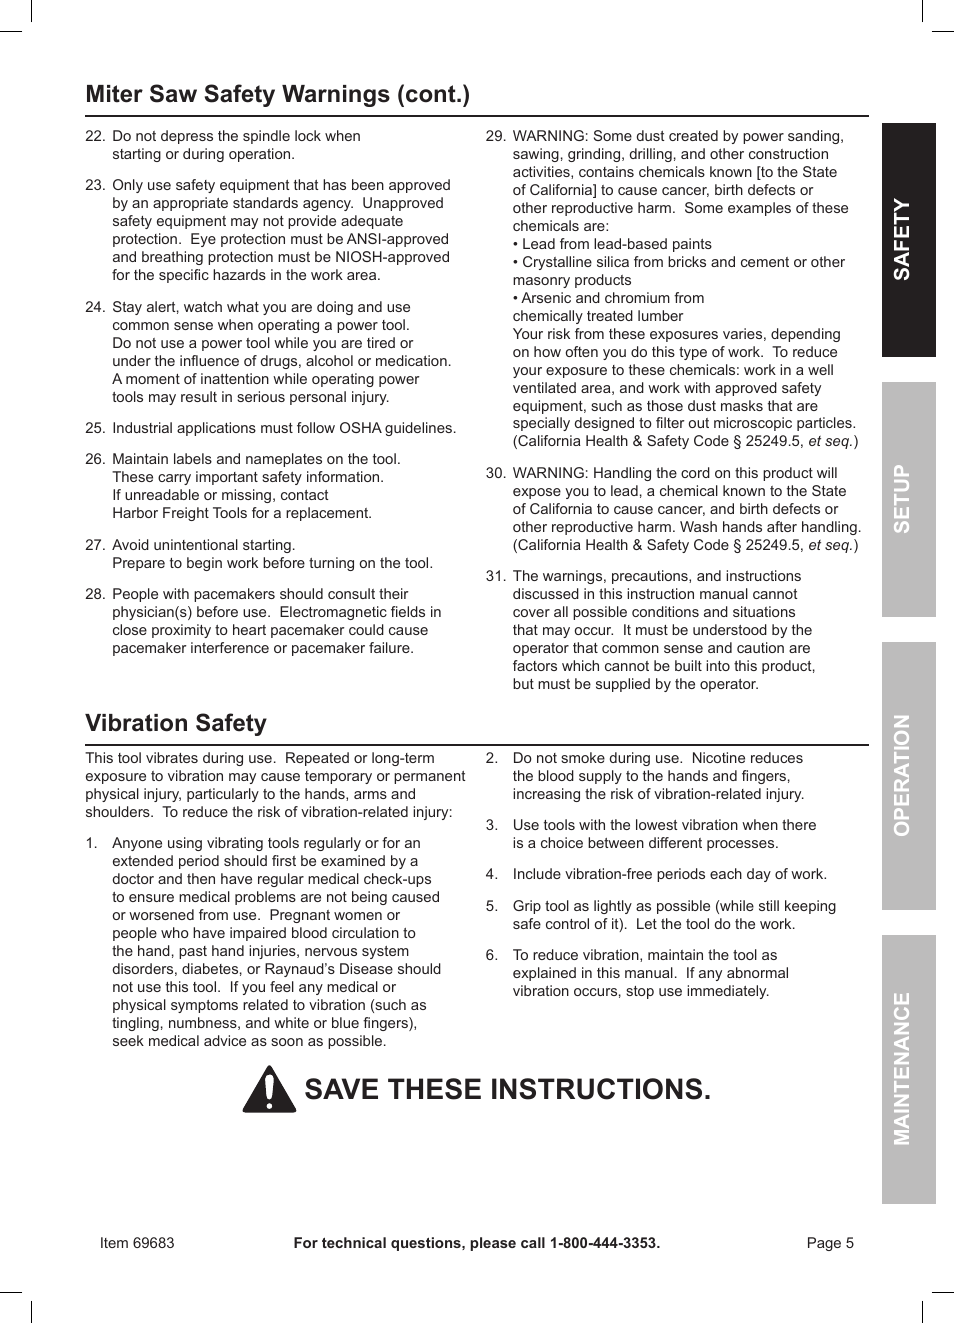 Save these instructions, Vibration safety, Miter saw safety warnings  (cont.) | Chicago Electric 10" Compound Miter Saw with Laser Guide 69683  User Manual | Page 5 / 20 | Original mode